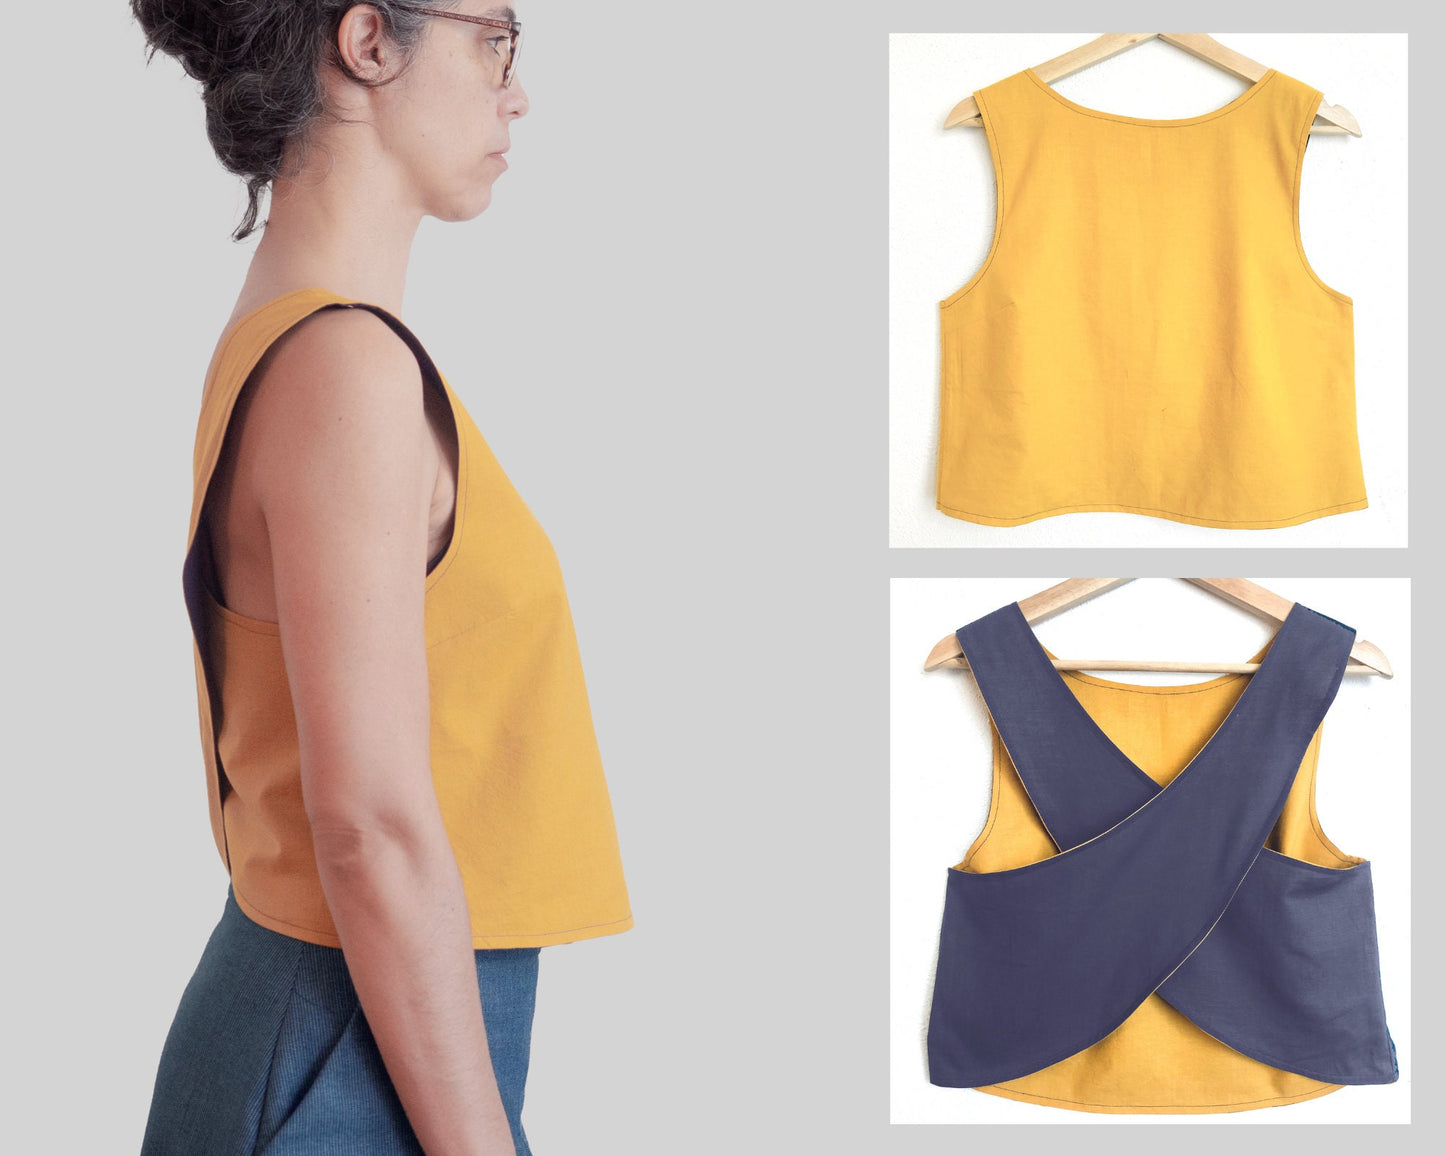 BRIA crossback top - sewing pattern